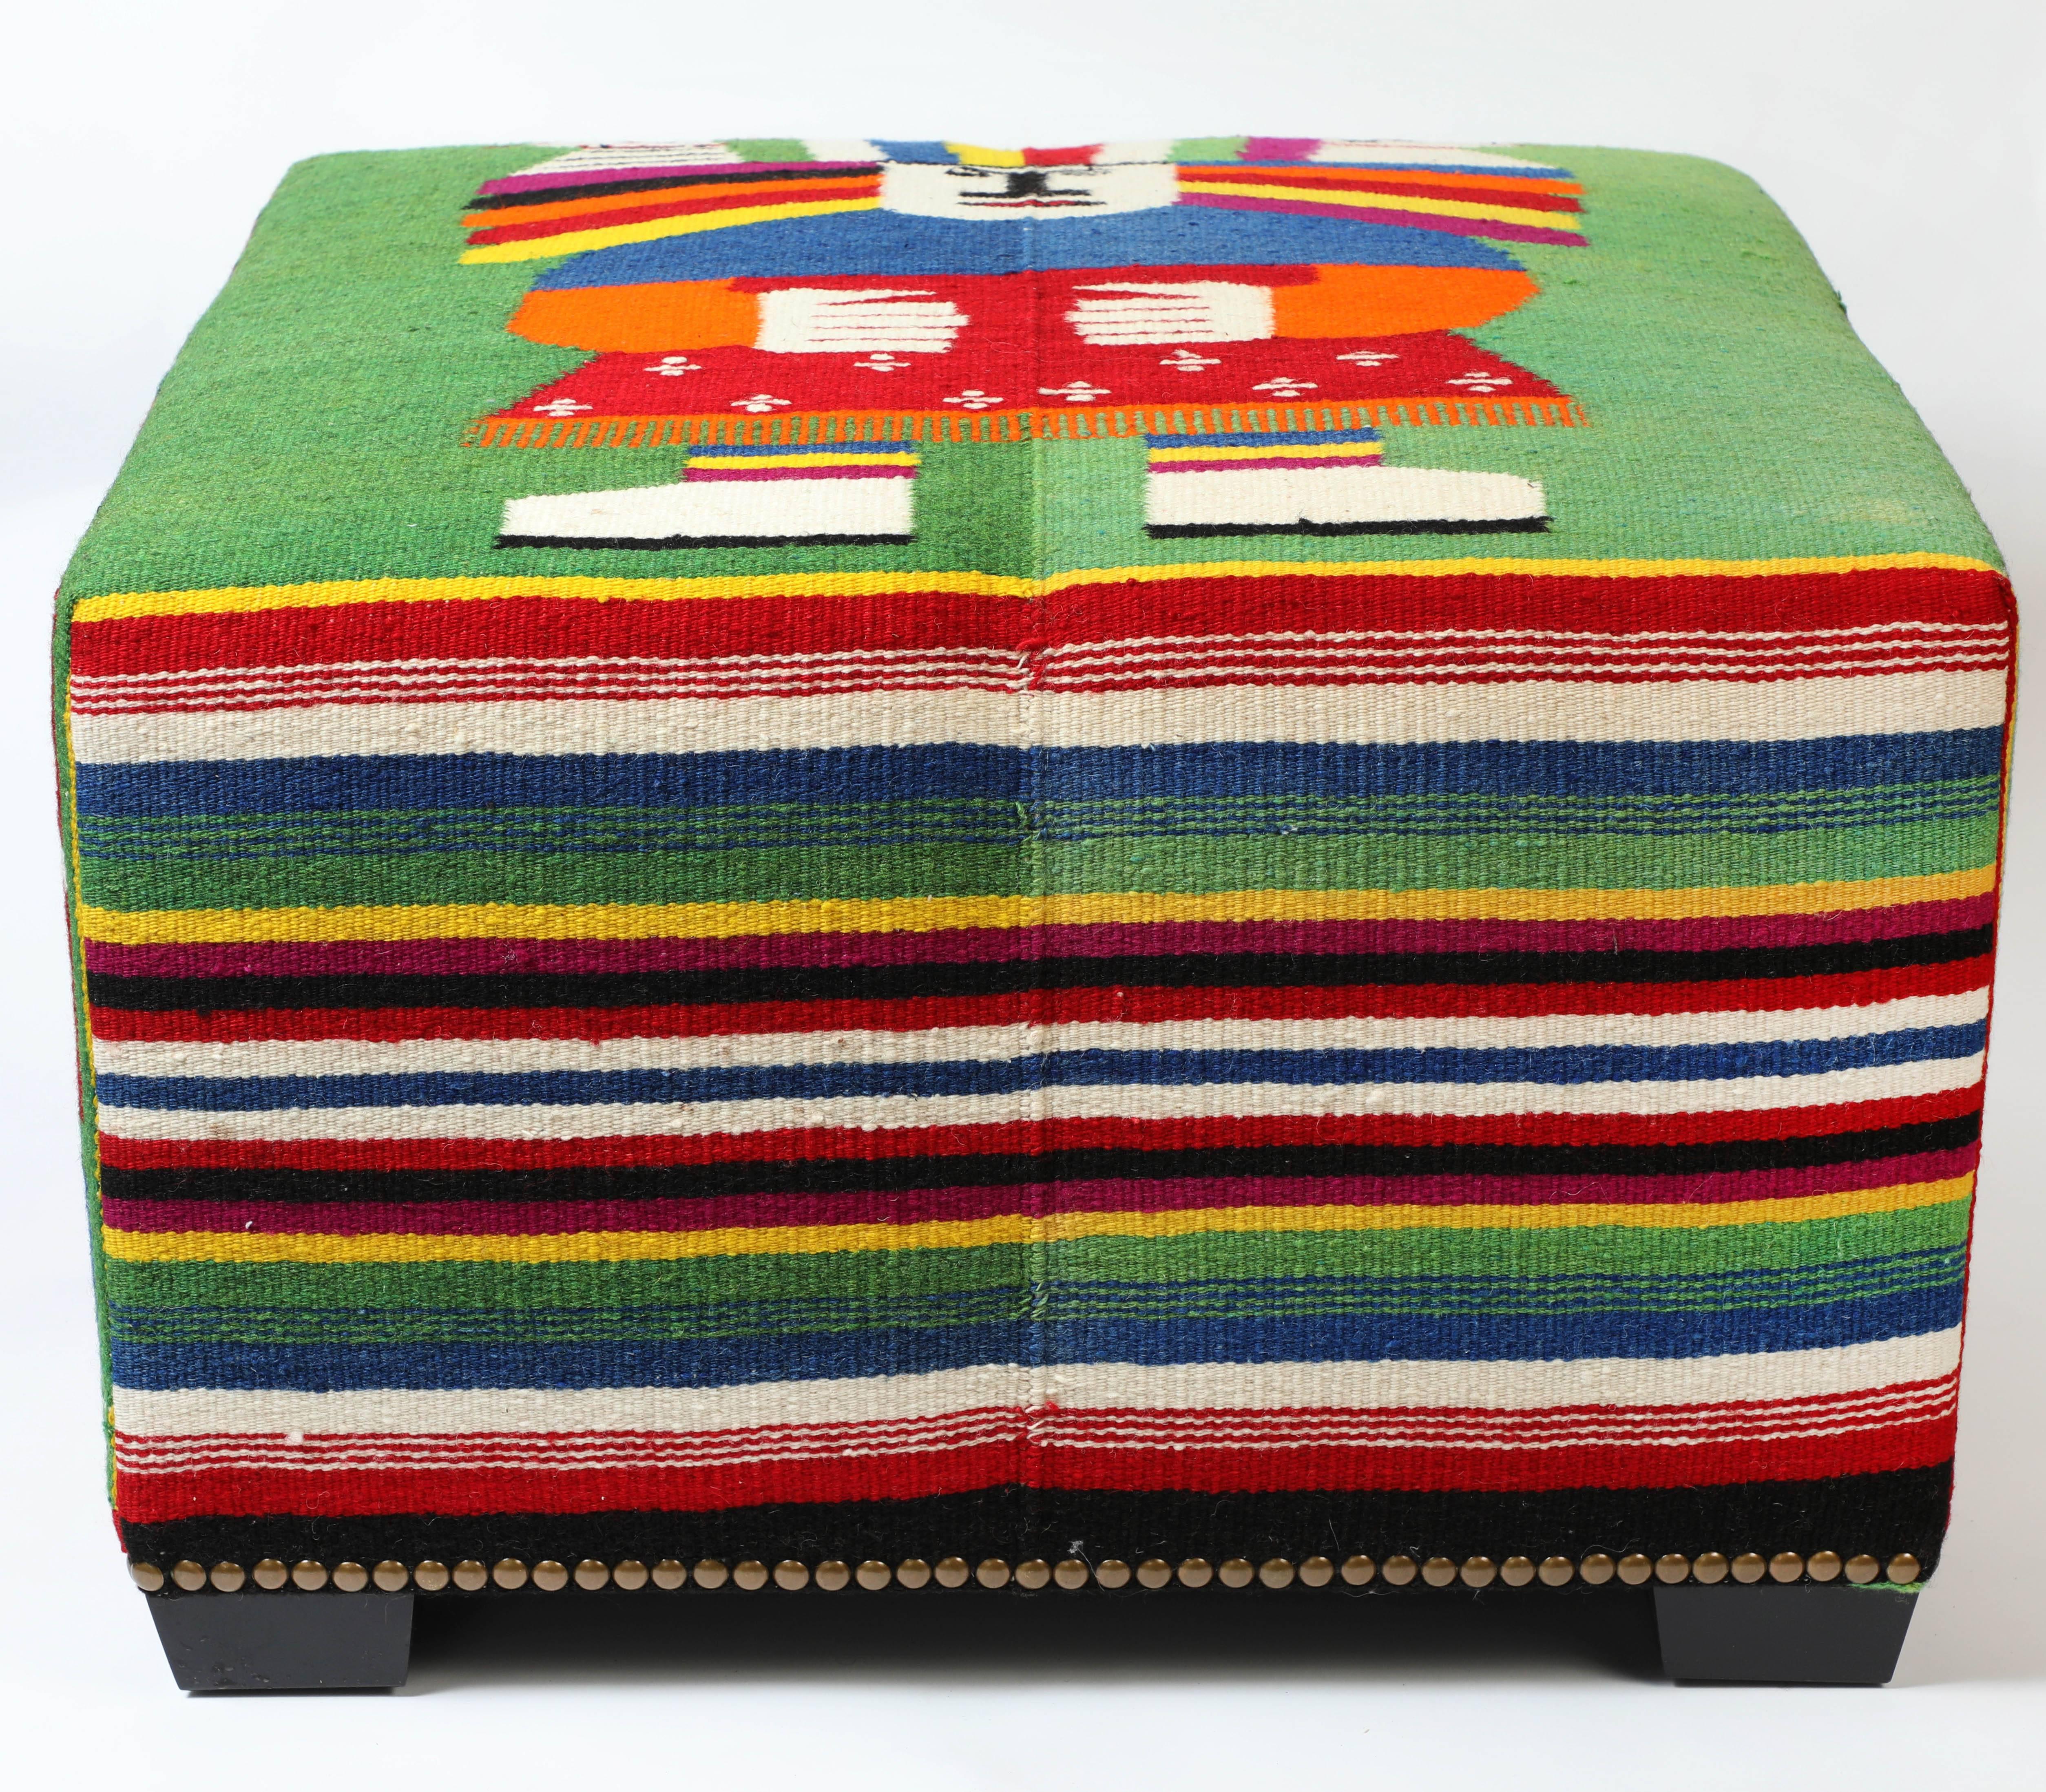 Limited Edition Cube combine vintage textiles with custom-scaled pieces to create interesting and useful accent seating. Each piece is one of a kind.

This custom-made ottoman with wood feet and nailhead trim features a colorful woven vintage